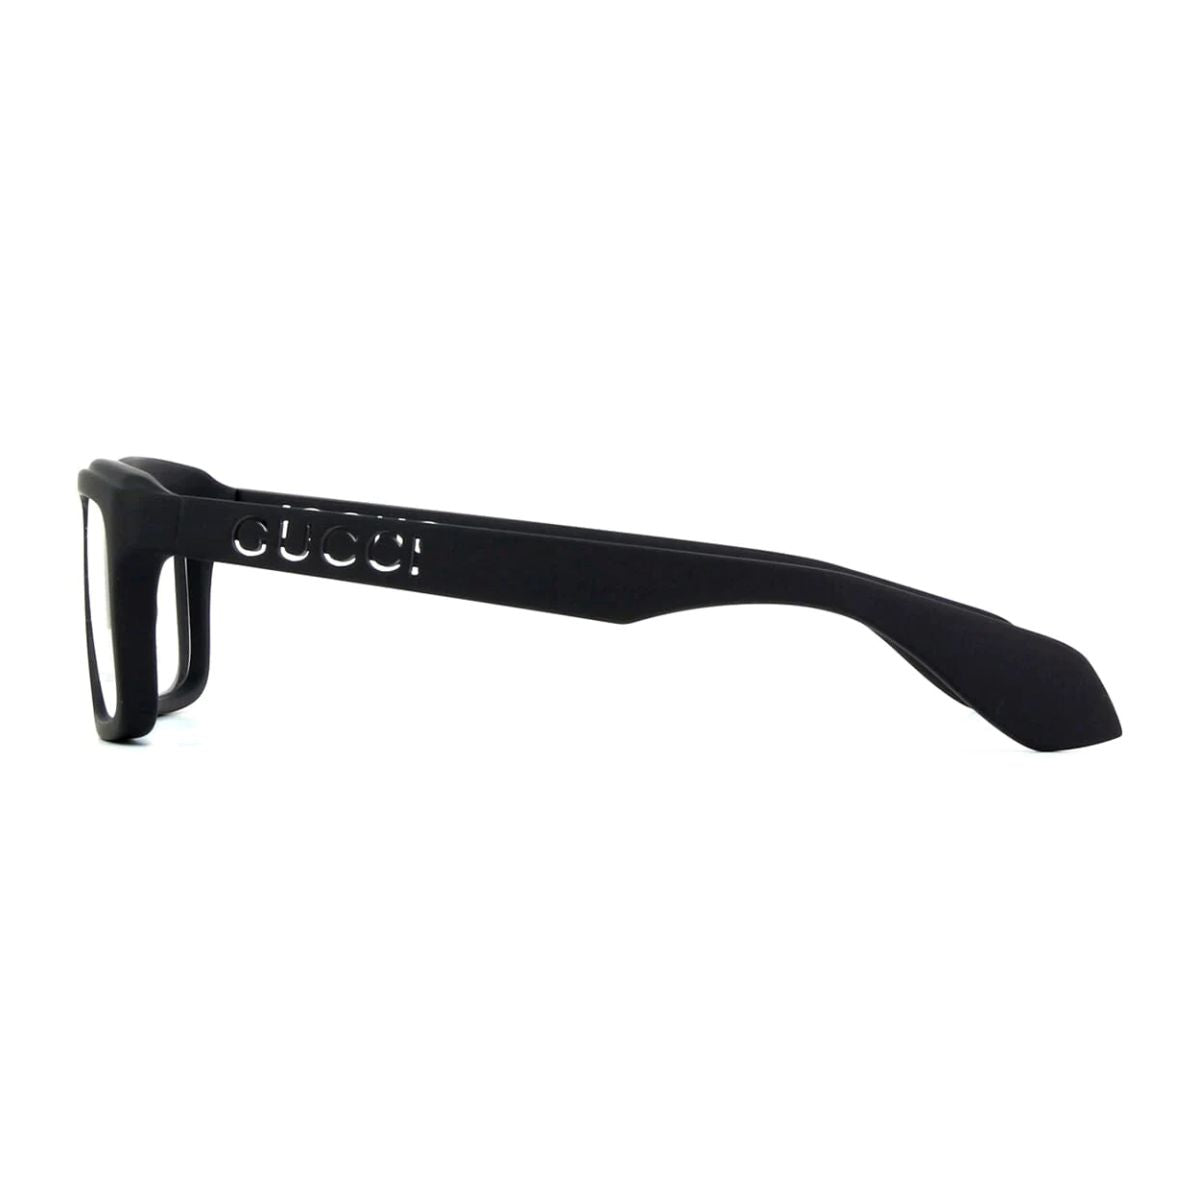 "Fashionable Gucci Eyewear - Model 1572O 001 frames combining style and sophistication seamlessly."